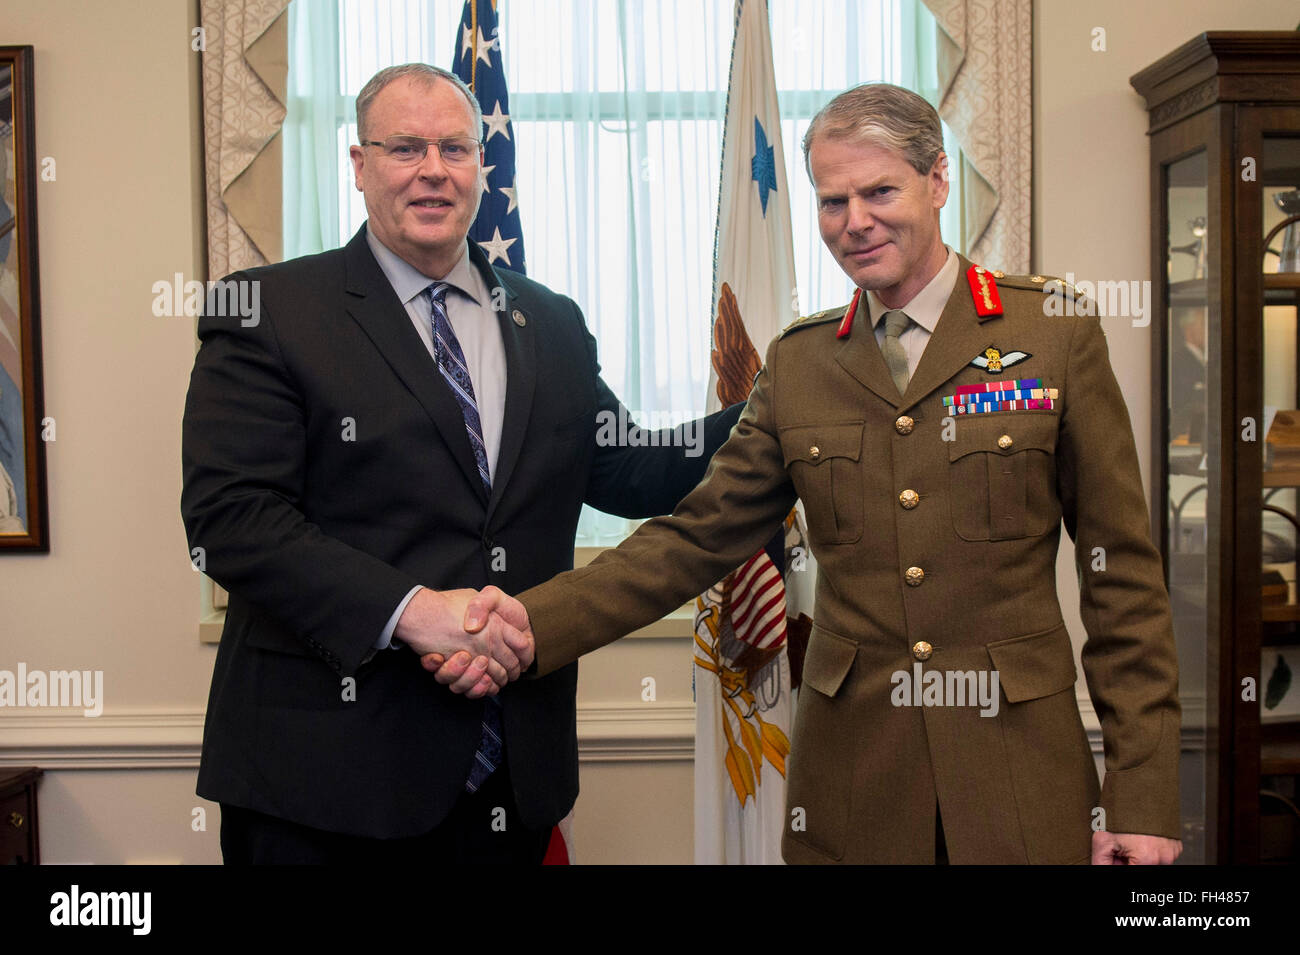 Deputy Secretary of Defense Bob Work greets Deputy Supreme Allied Commander Europe General Sir Adrian Bradshaw at the Pentagon, Feb. 22, 2016. The two leaders met to discuss matters of mutual importance. Stock Photo